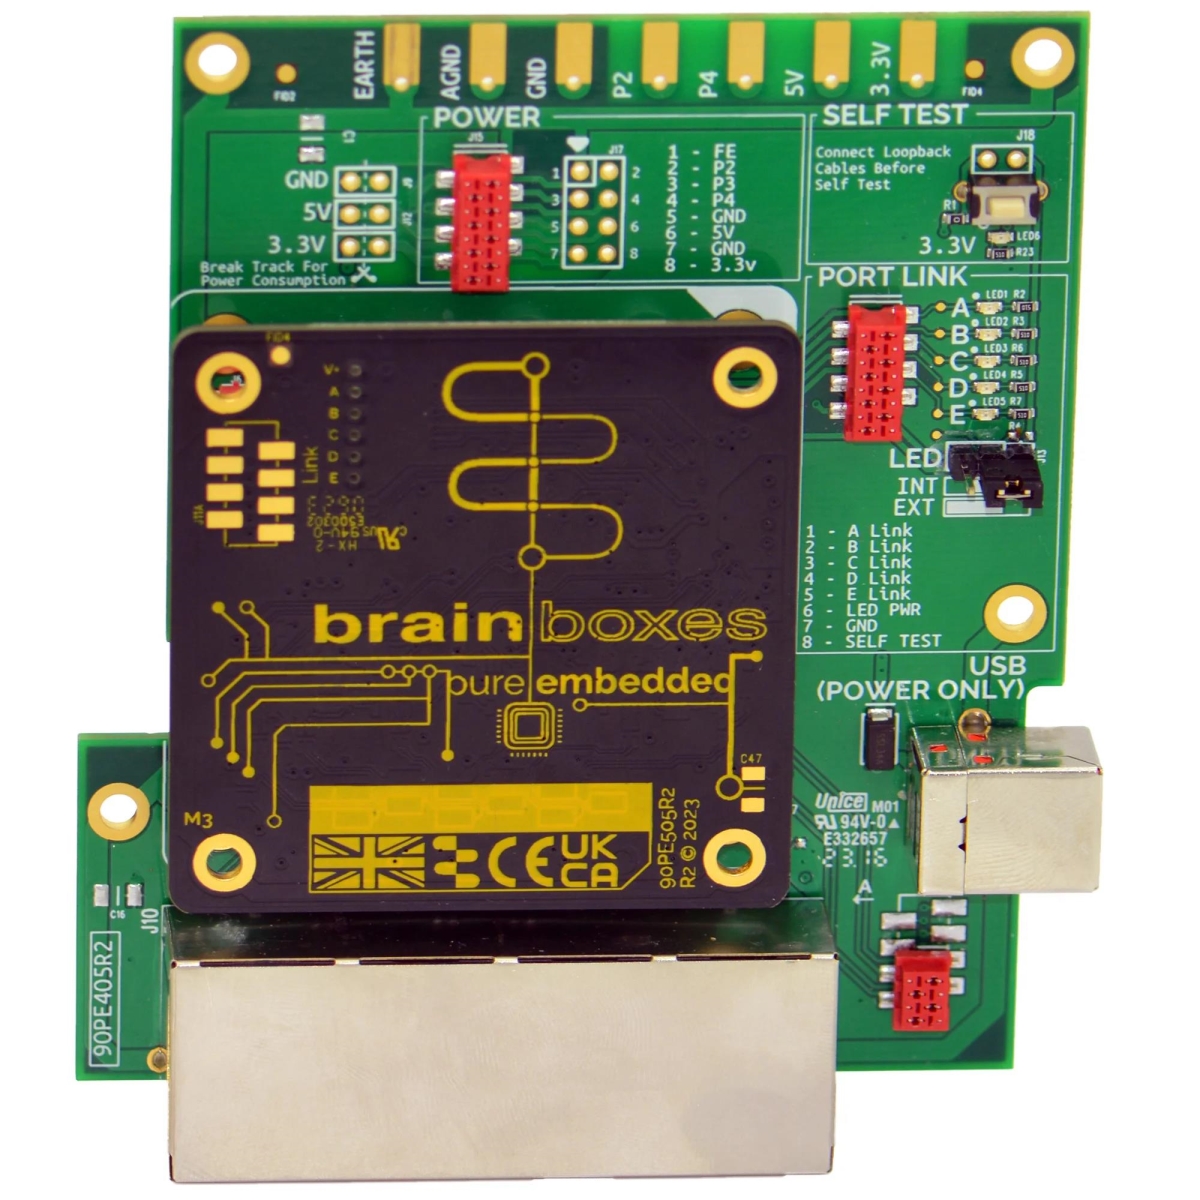 Picture of Brainboxes PE-405 Ethernet Development Tools Embedded Ethernet Evaluation Kit Easy Access PE-505 functionality